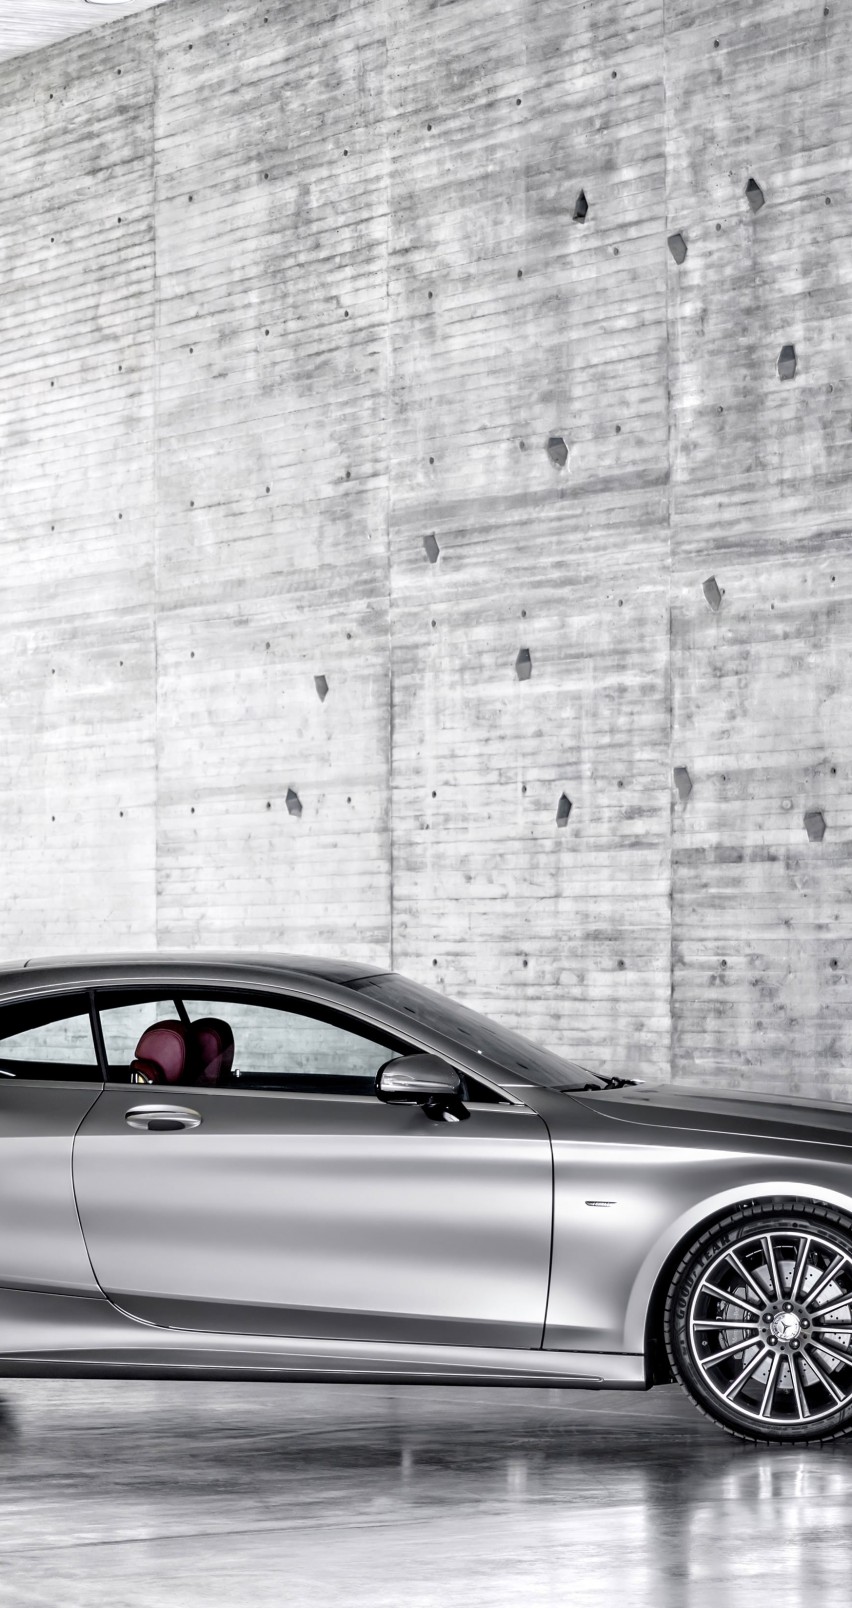 2015 Mercedes-Benz S-Class Coupe Wallpaper for Apple iPhone 6 / 6s